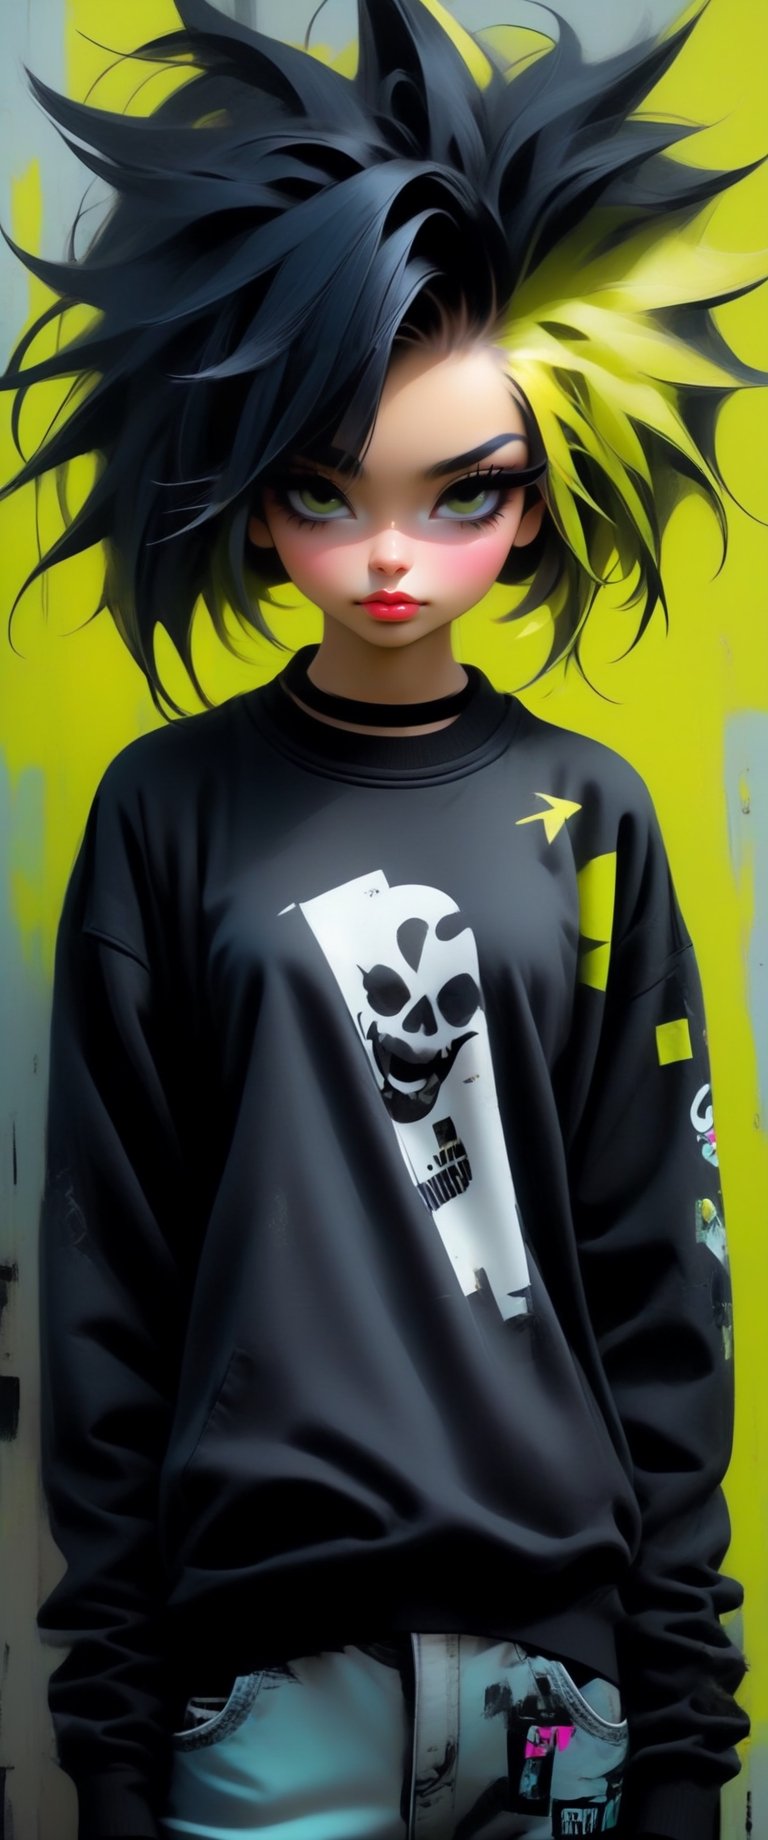 tomboy girl, punk attitude, toxic palette, messy hairstyle, merge vibrant of pop art style and gloominess of gothic style, intricate detail, dark comedy embience,TechStreetwear,